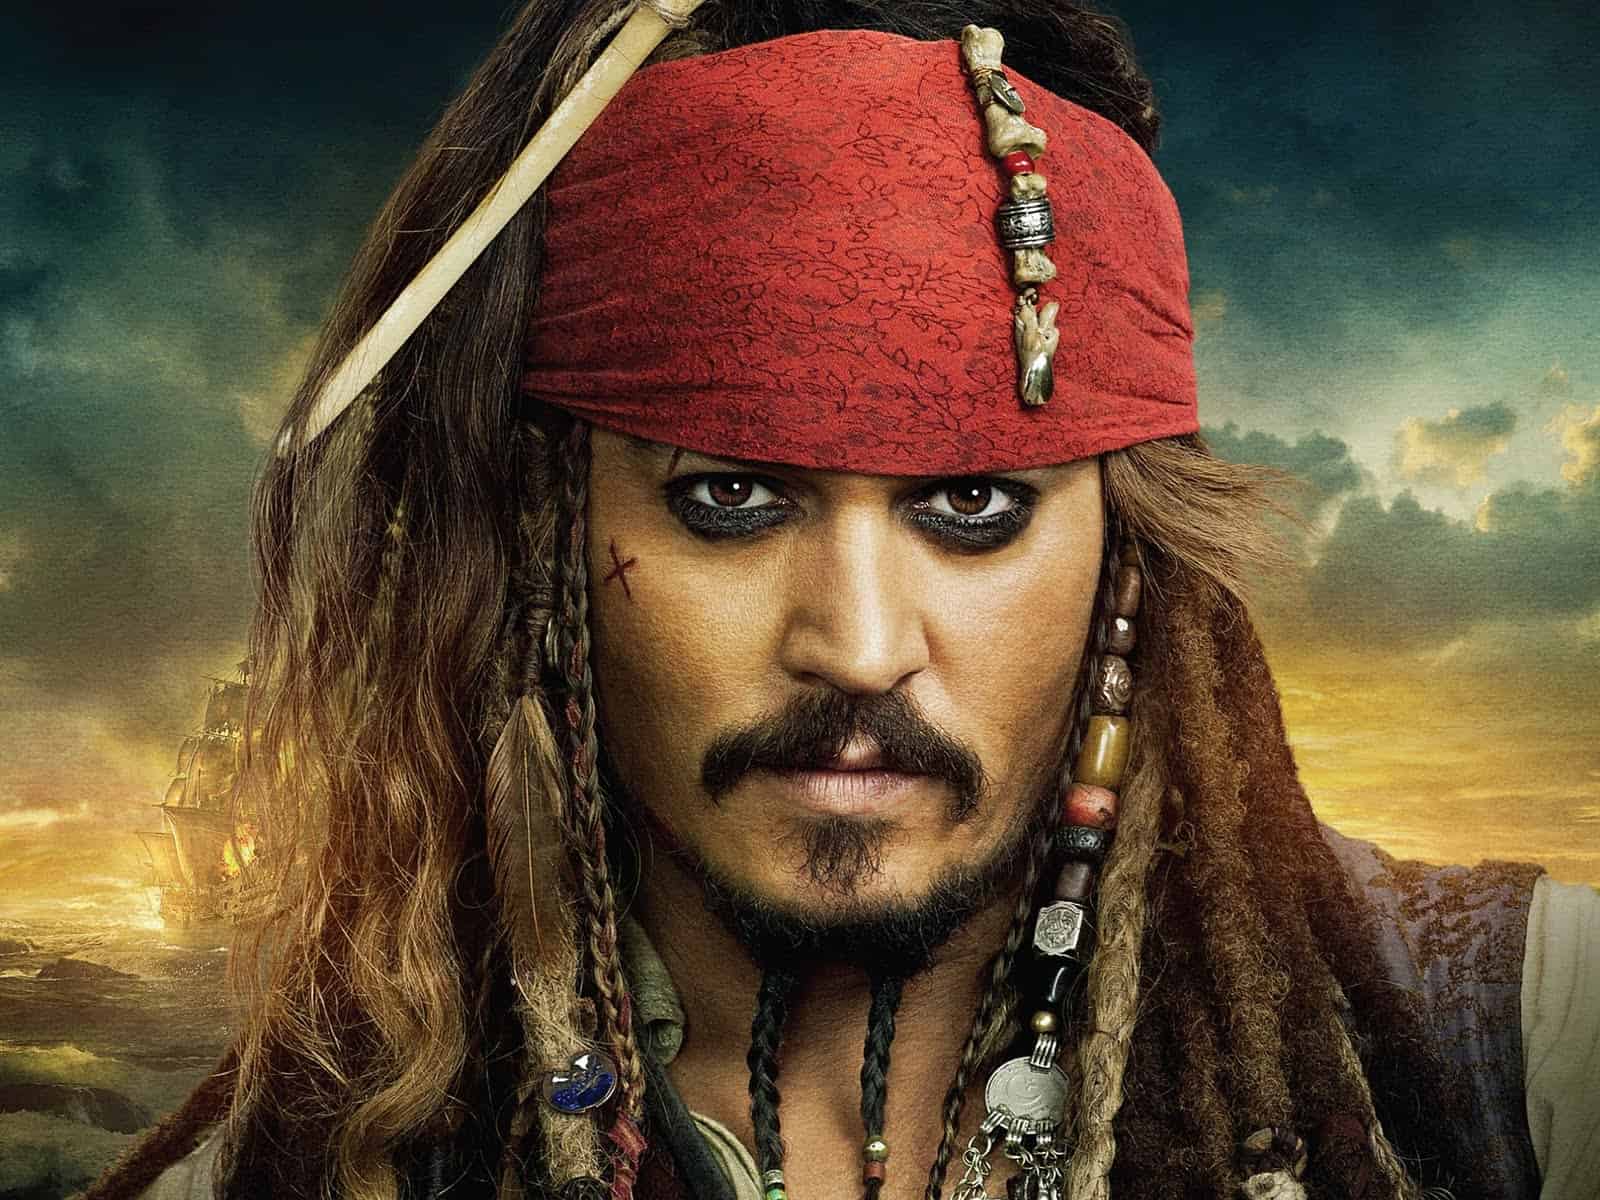 The Best of Johnny Depp Movies